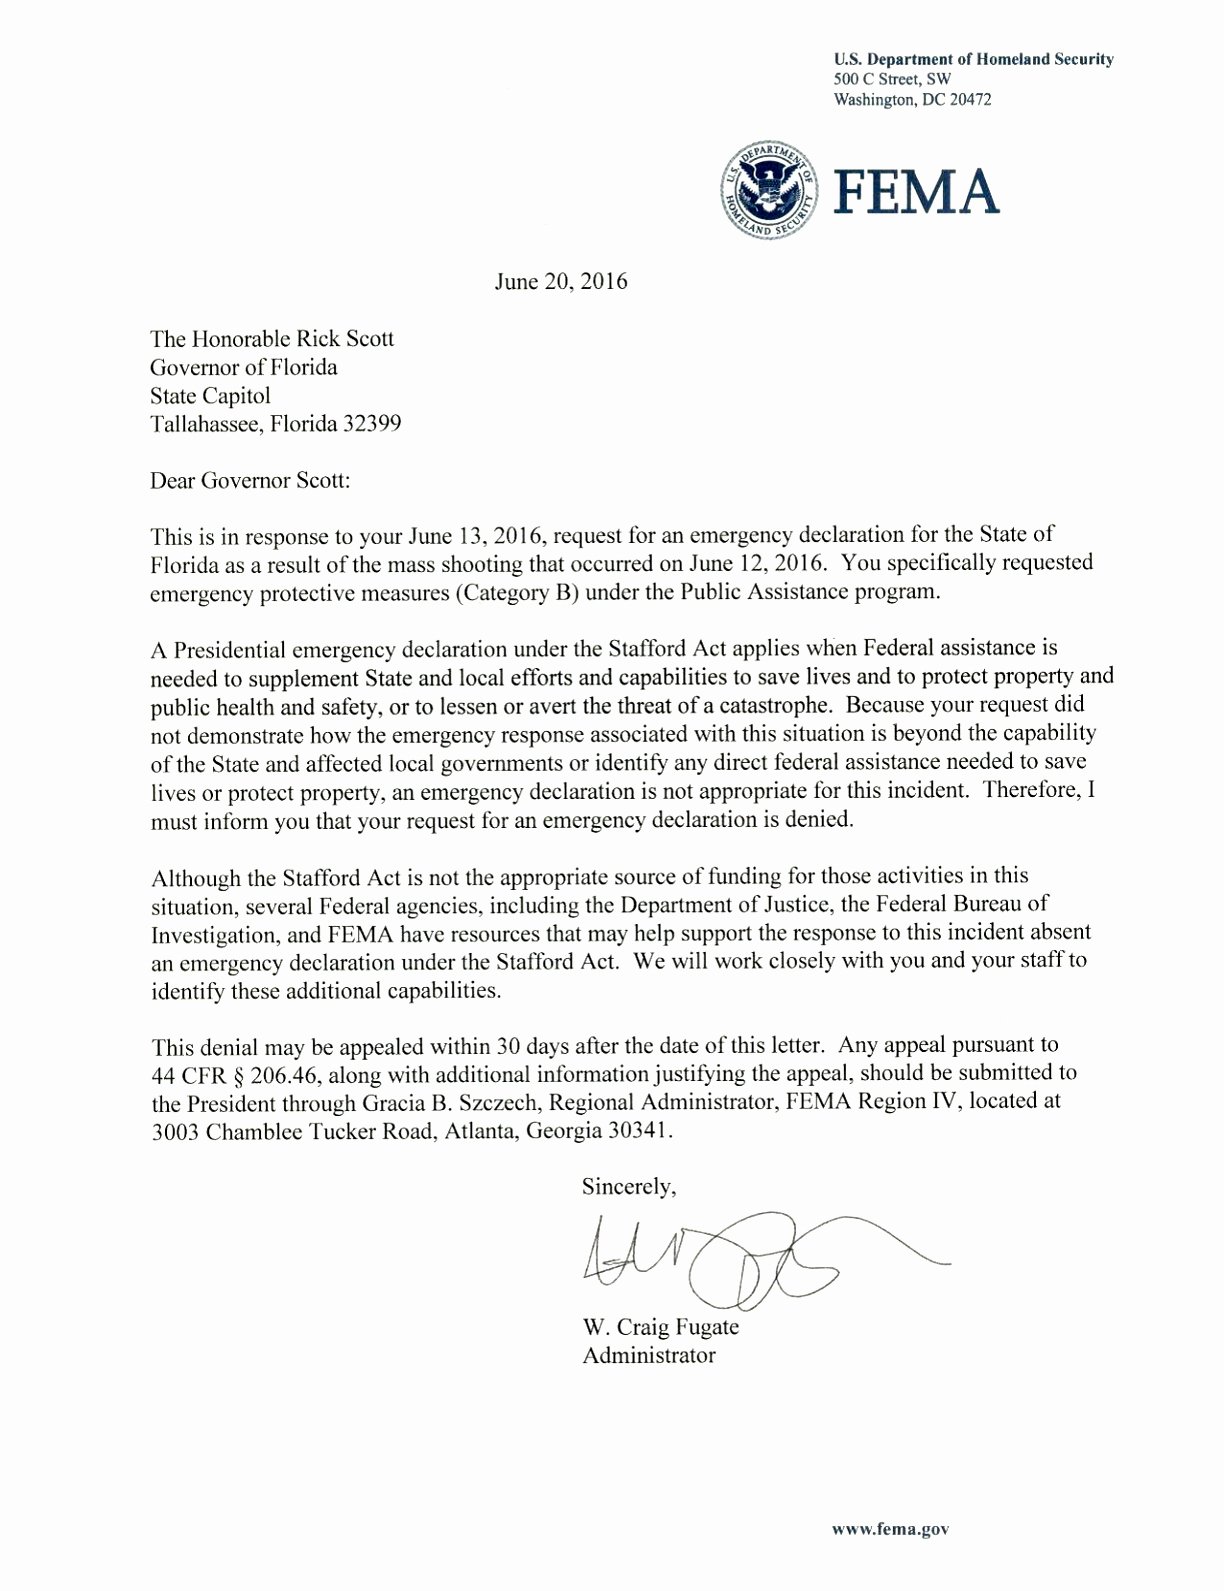 Fema Appeal Letter Template Best Of 7 Fema Appeal Letter Example Tusia